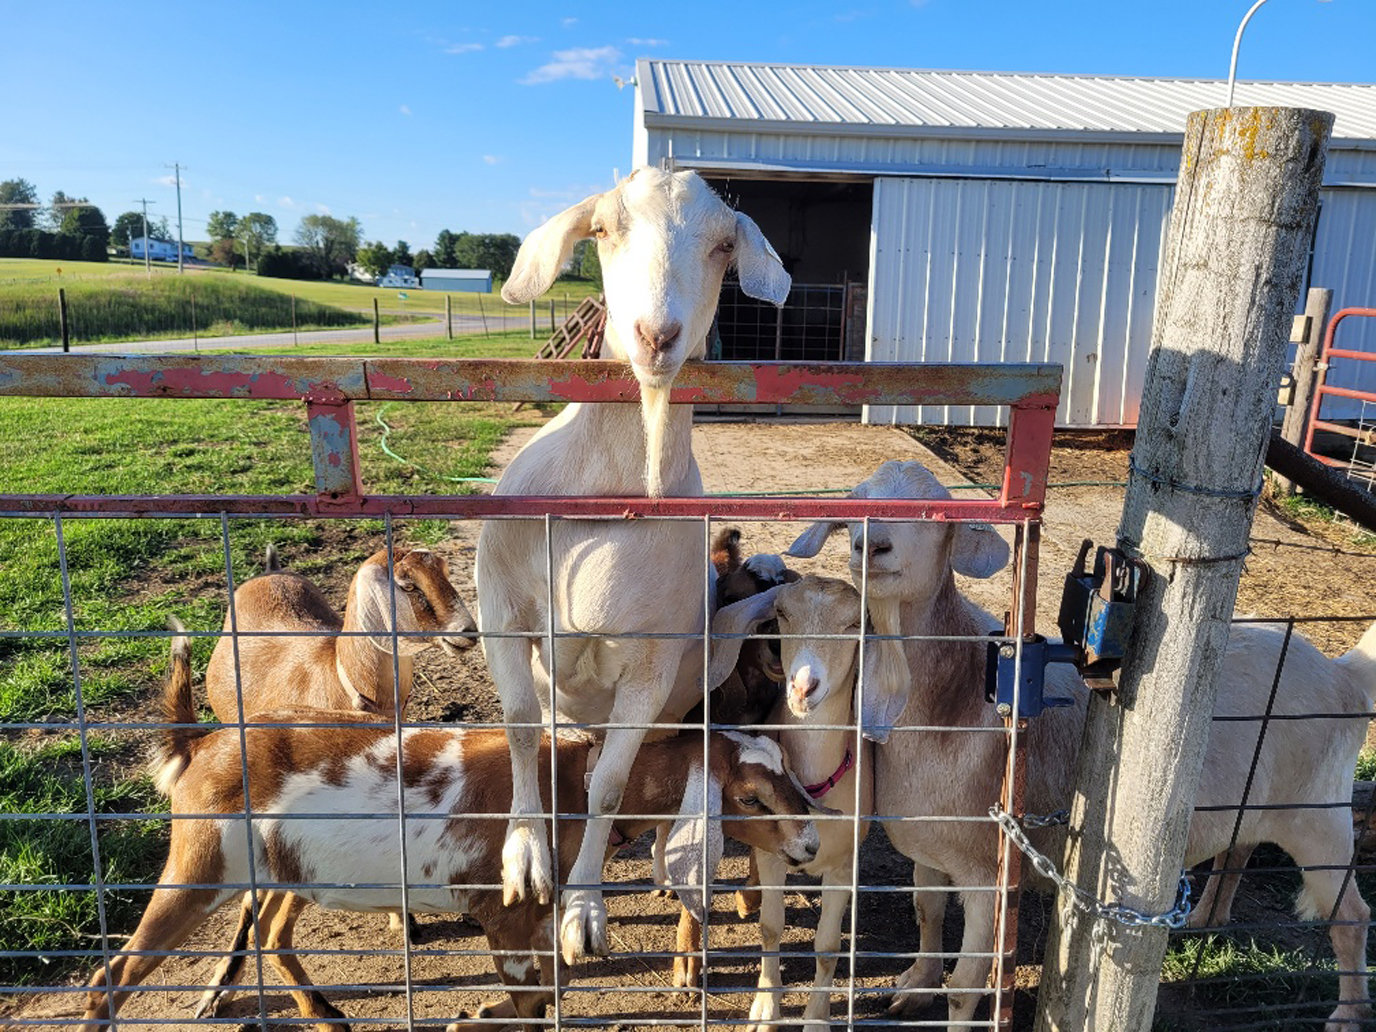 Turner raises cattle, goats and chickens on her 12-acre, Jackson County farm.